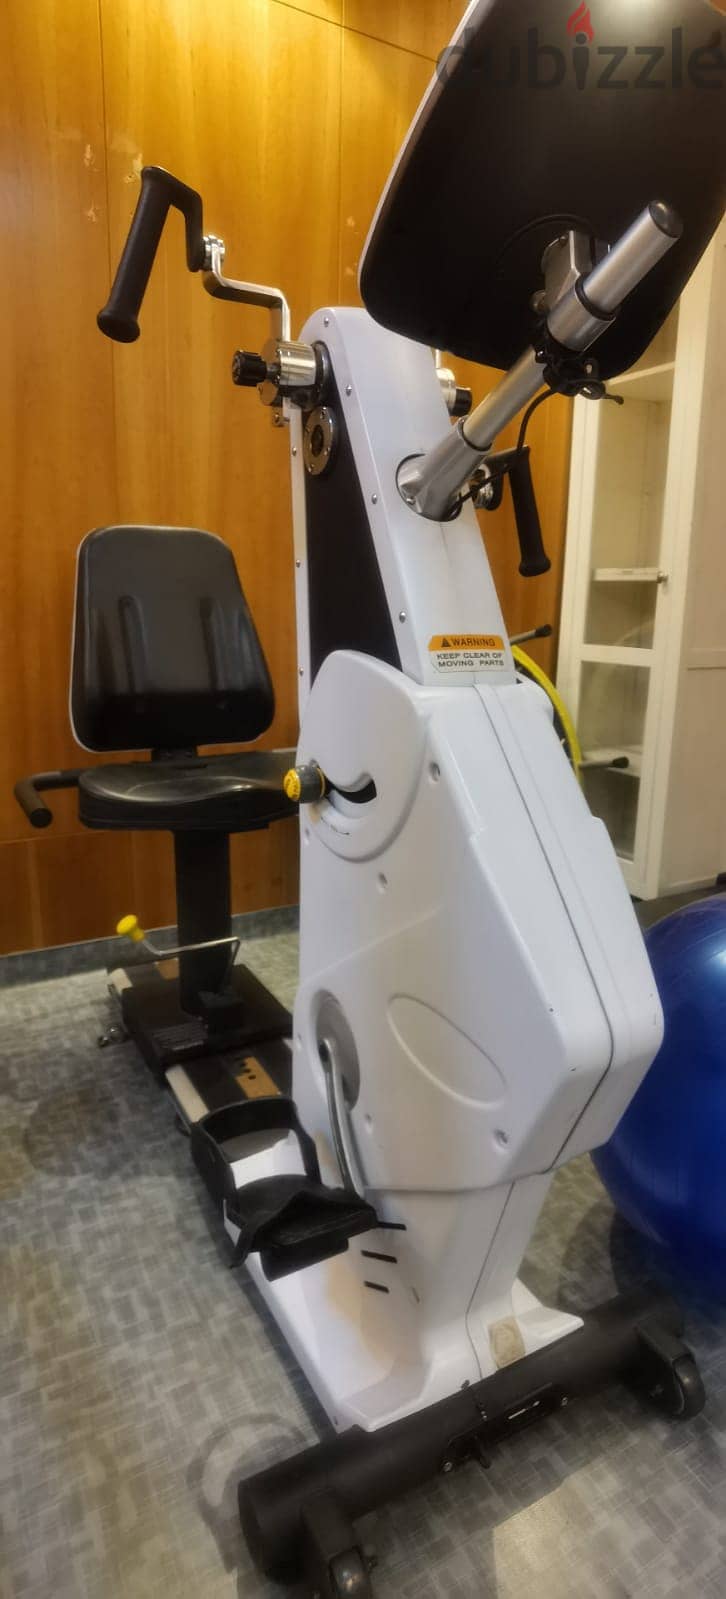 Physiotherapy Equipment for Sale 7